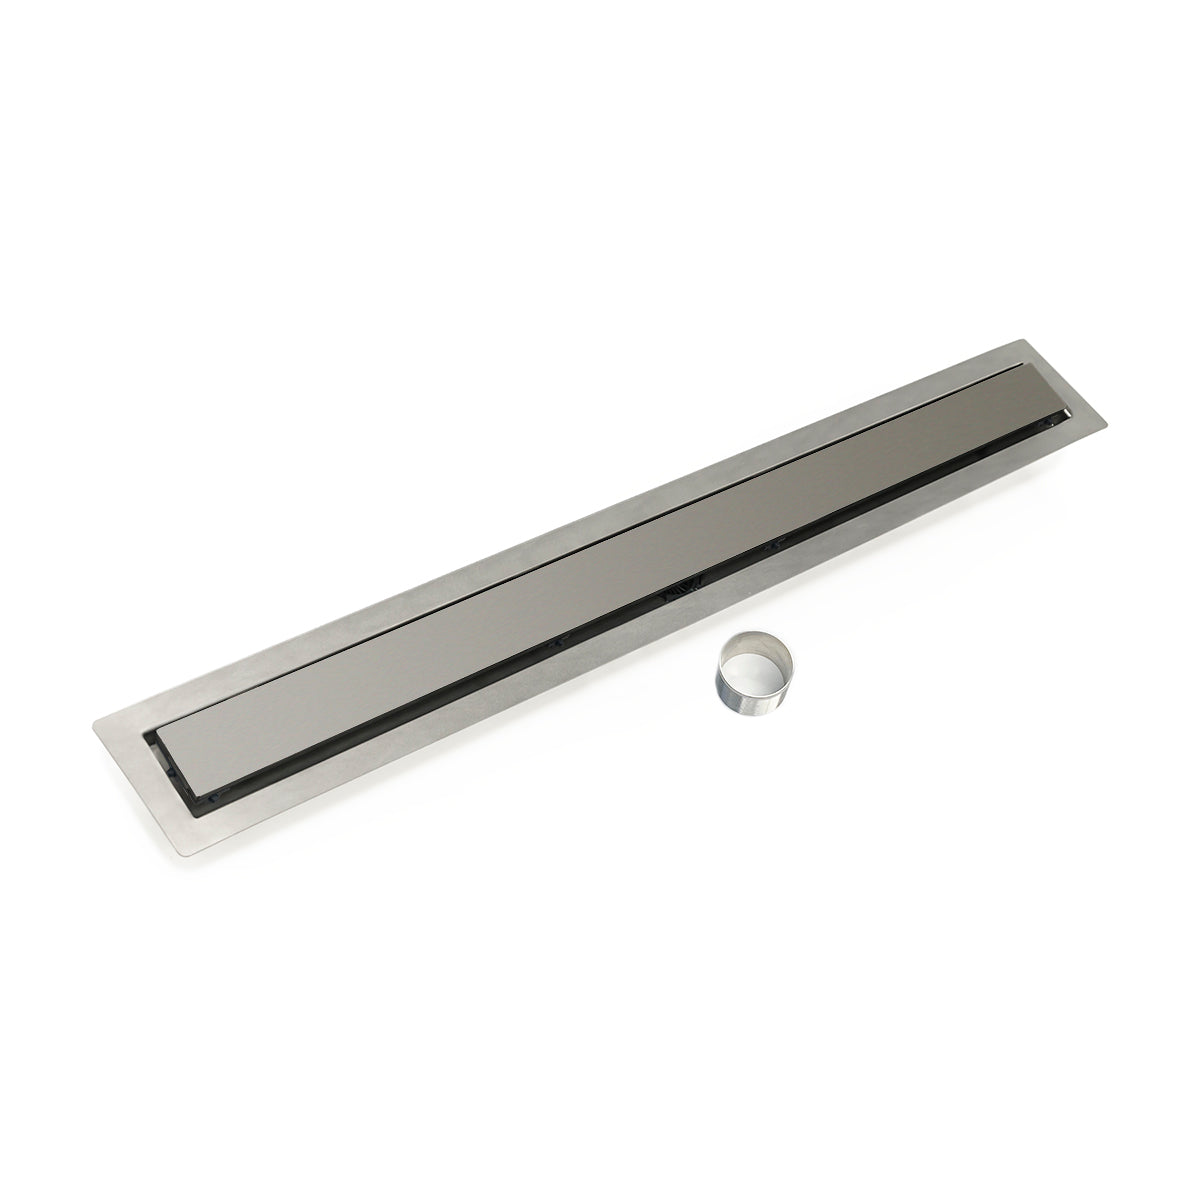 Infinity Drain 24" FCB Series Double Waterproofing Linear Drain Kit with 2 1/2" Solid Grate